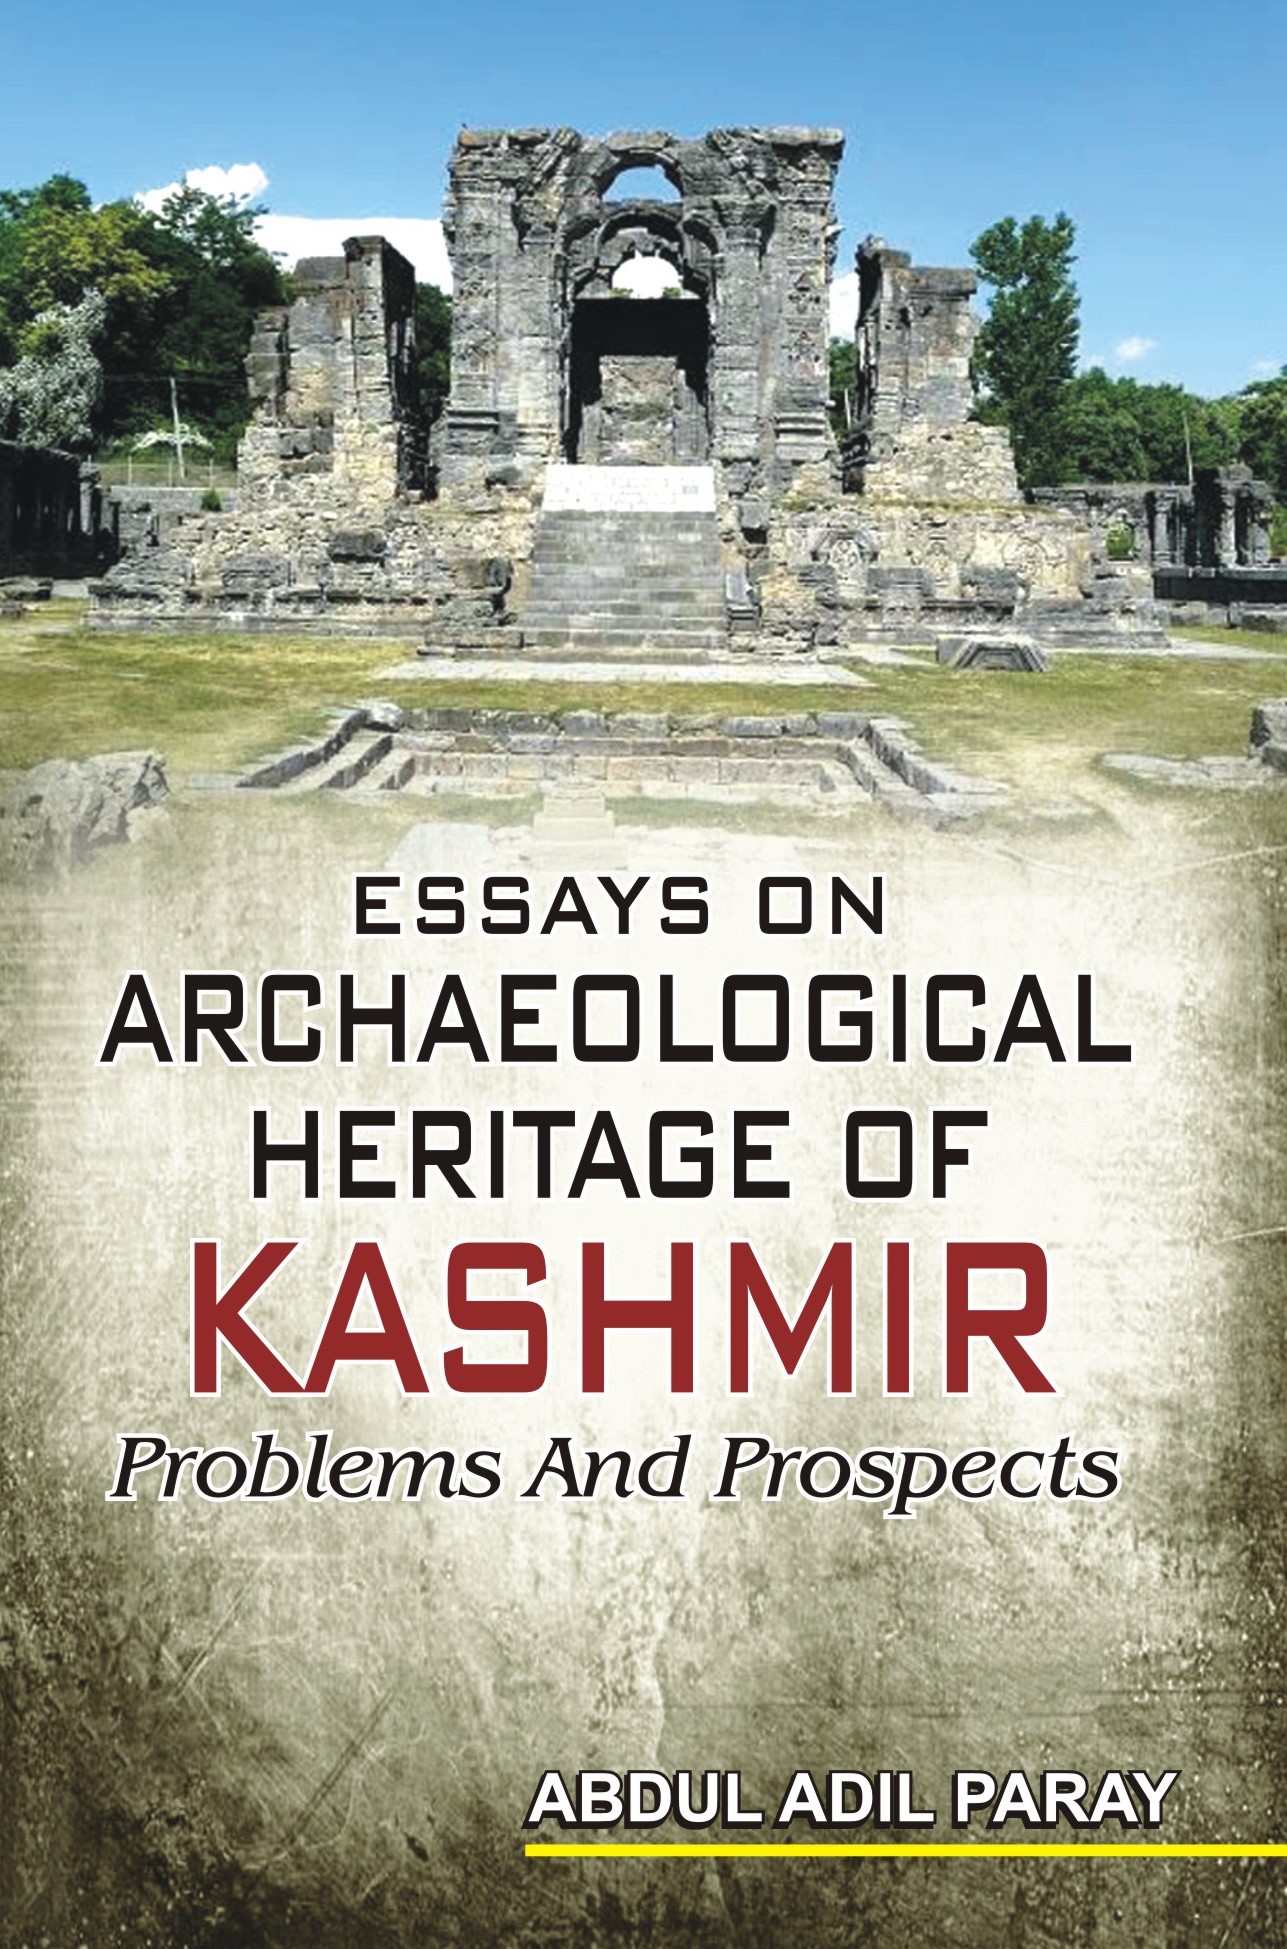 ESSAYS ON ARCHAEOLOGICAL HERITAGE OF KASHMIR PROBLEMS AND PROSPECTS